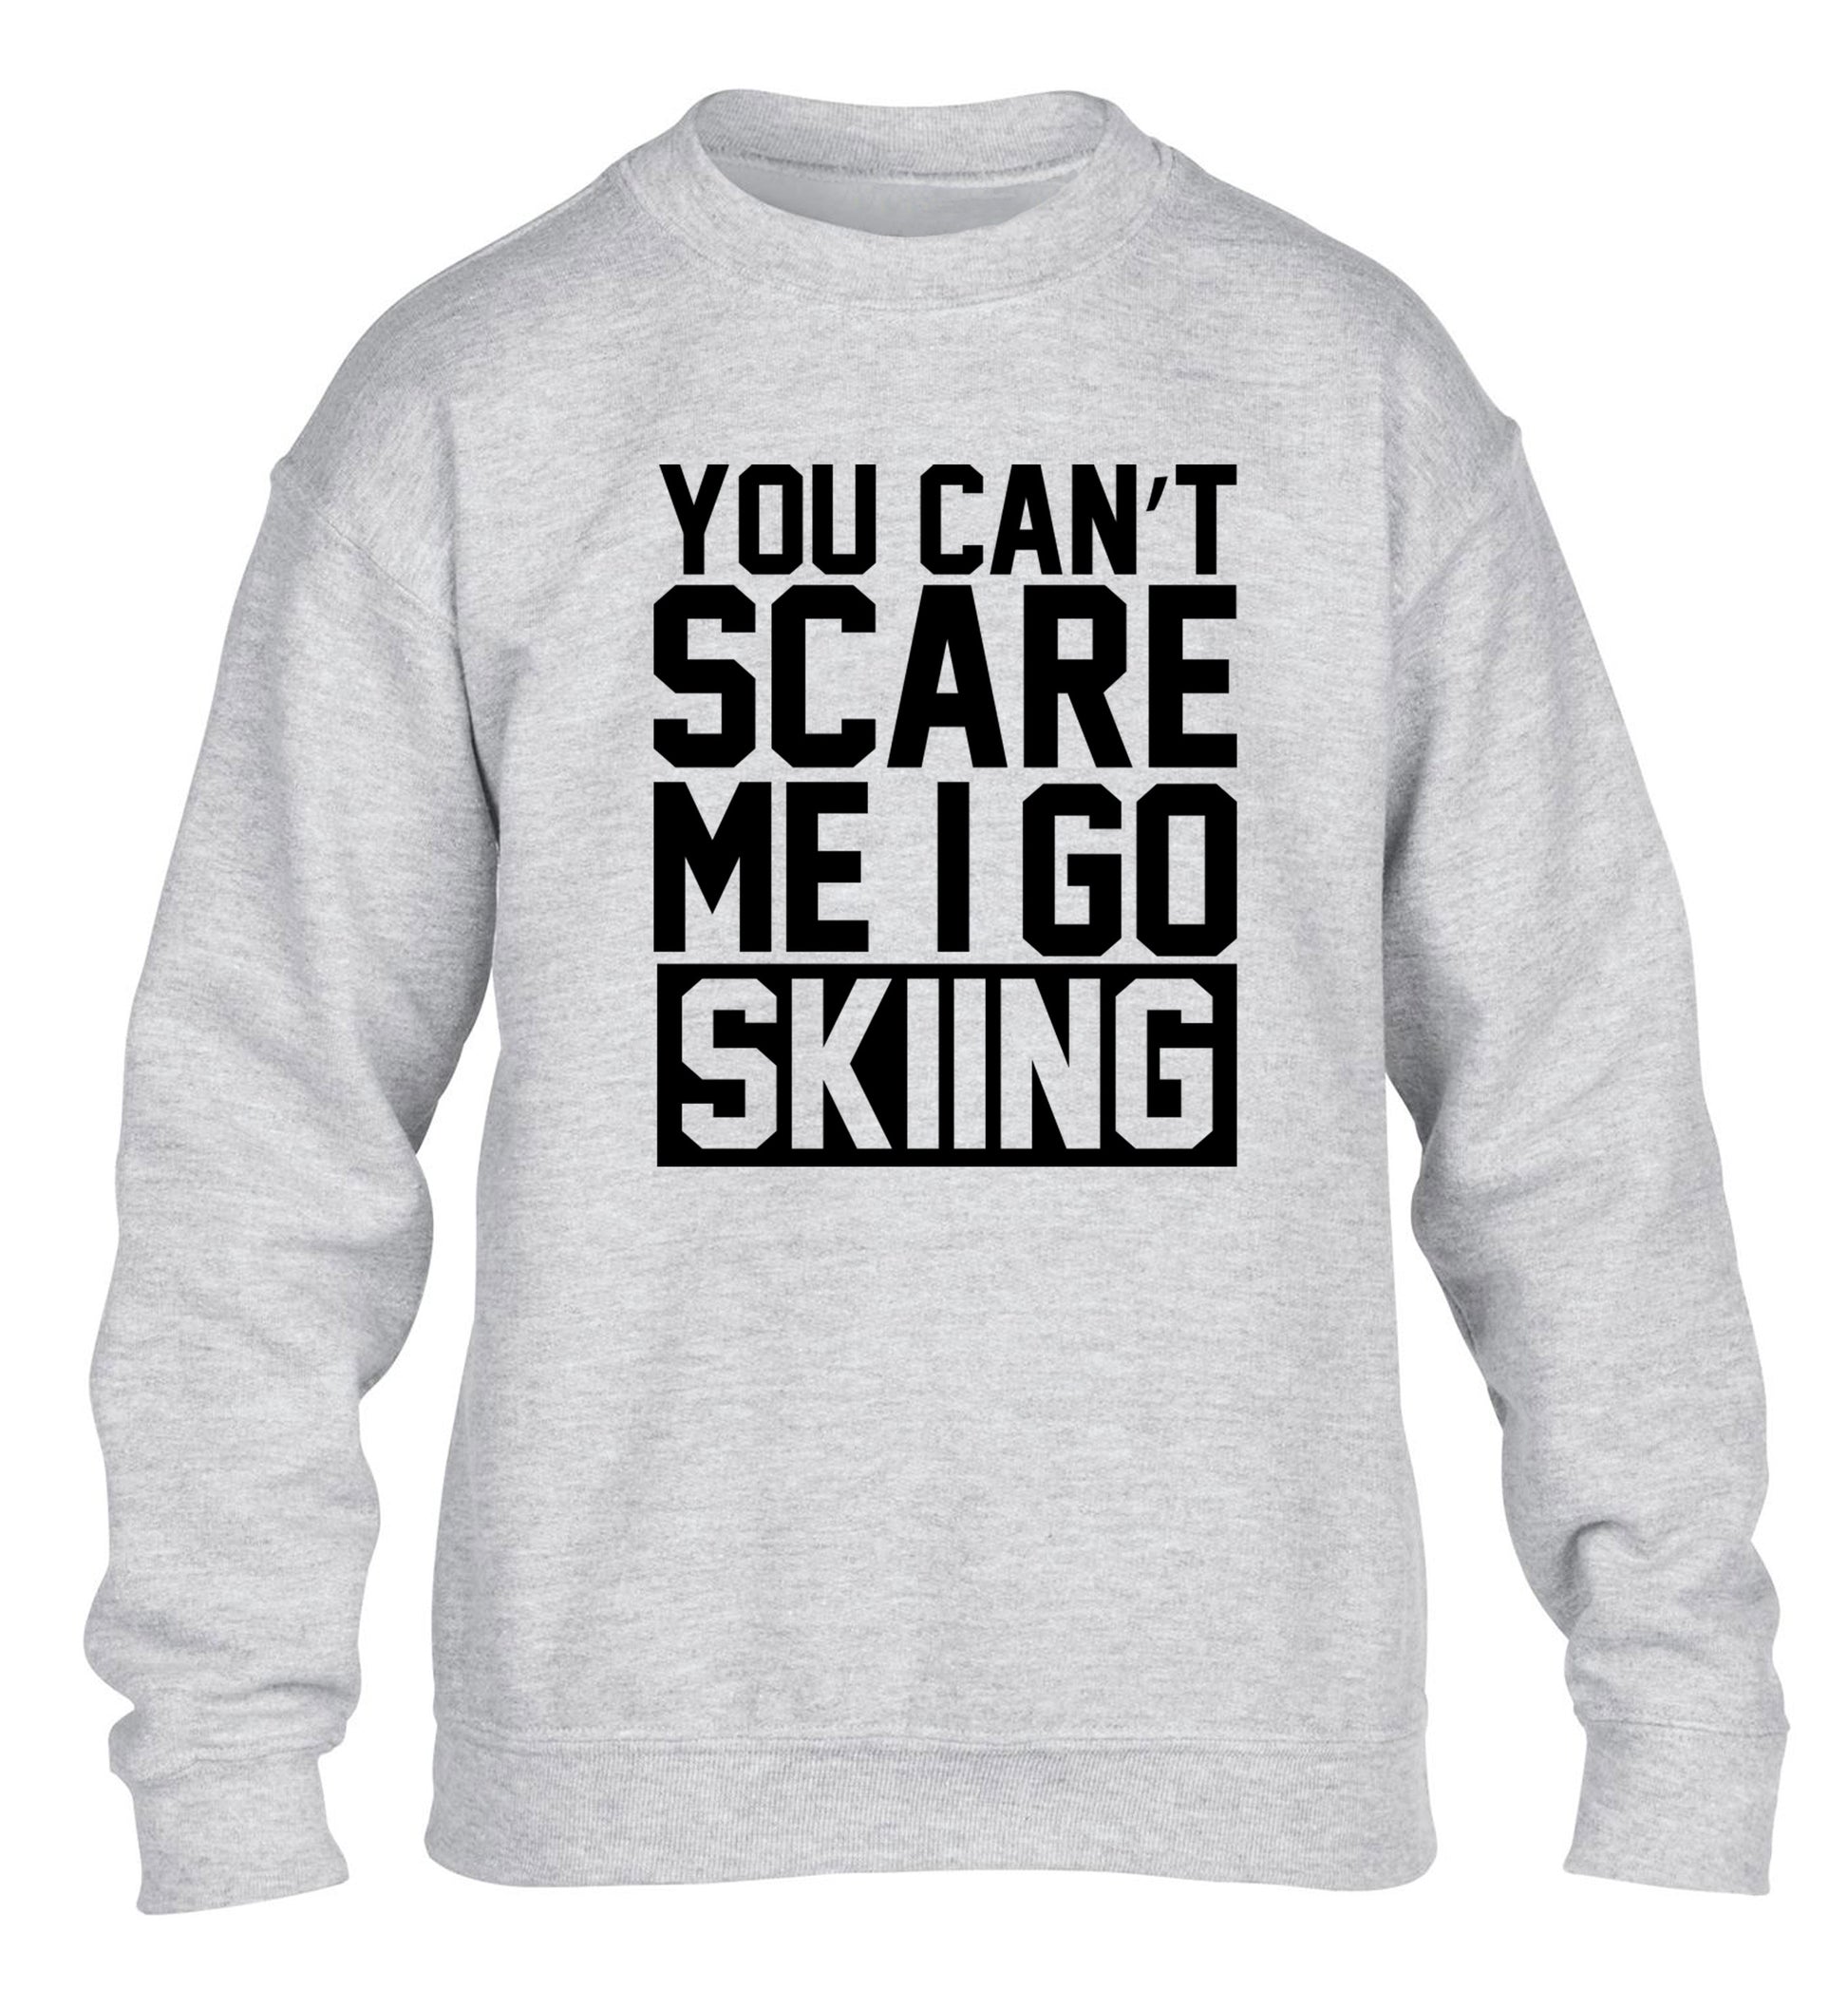 You can't scare me I go skiing children's grey sweater 12-14 Years